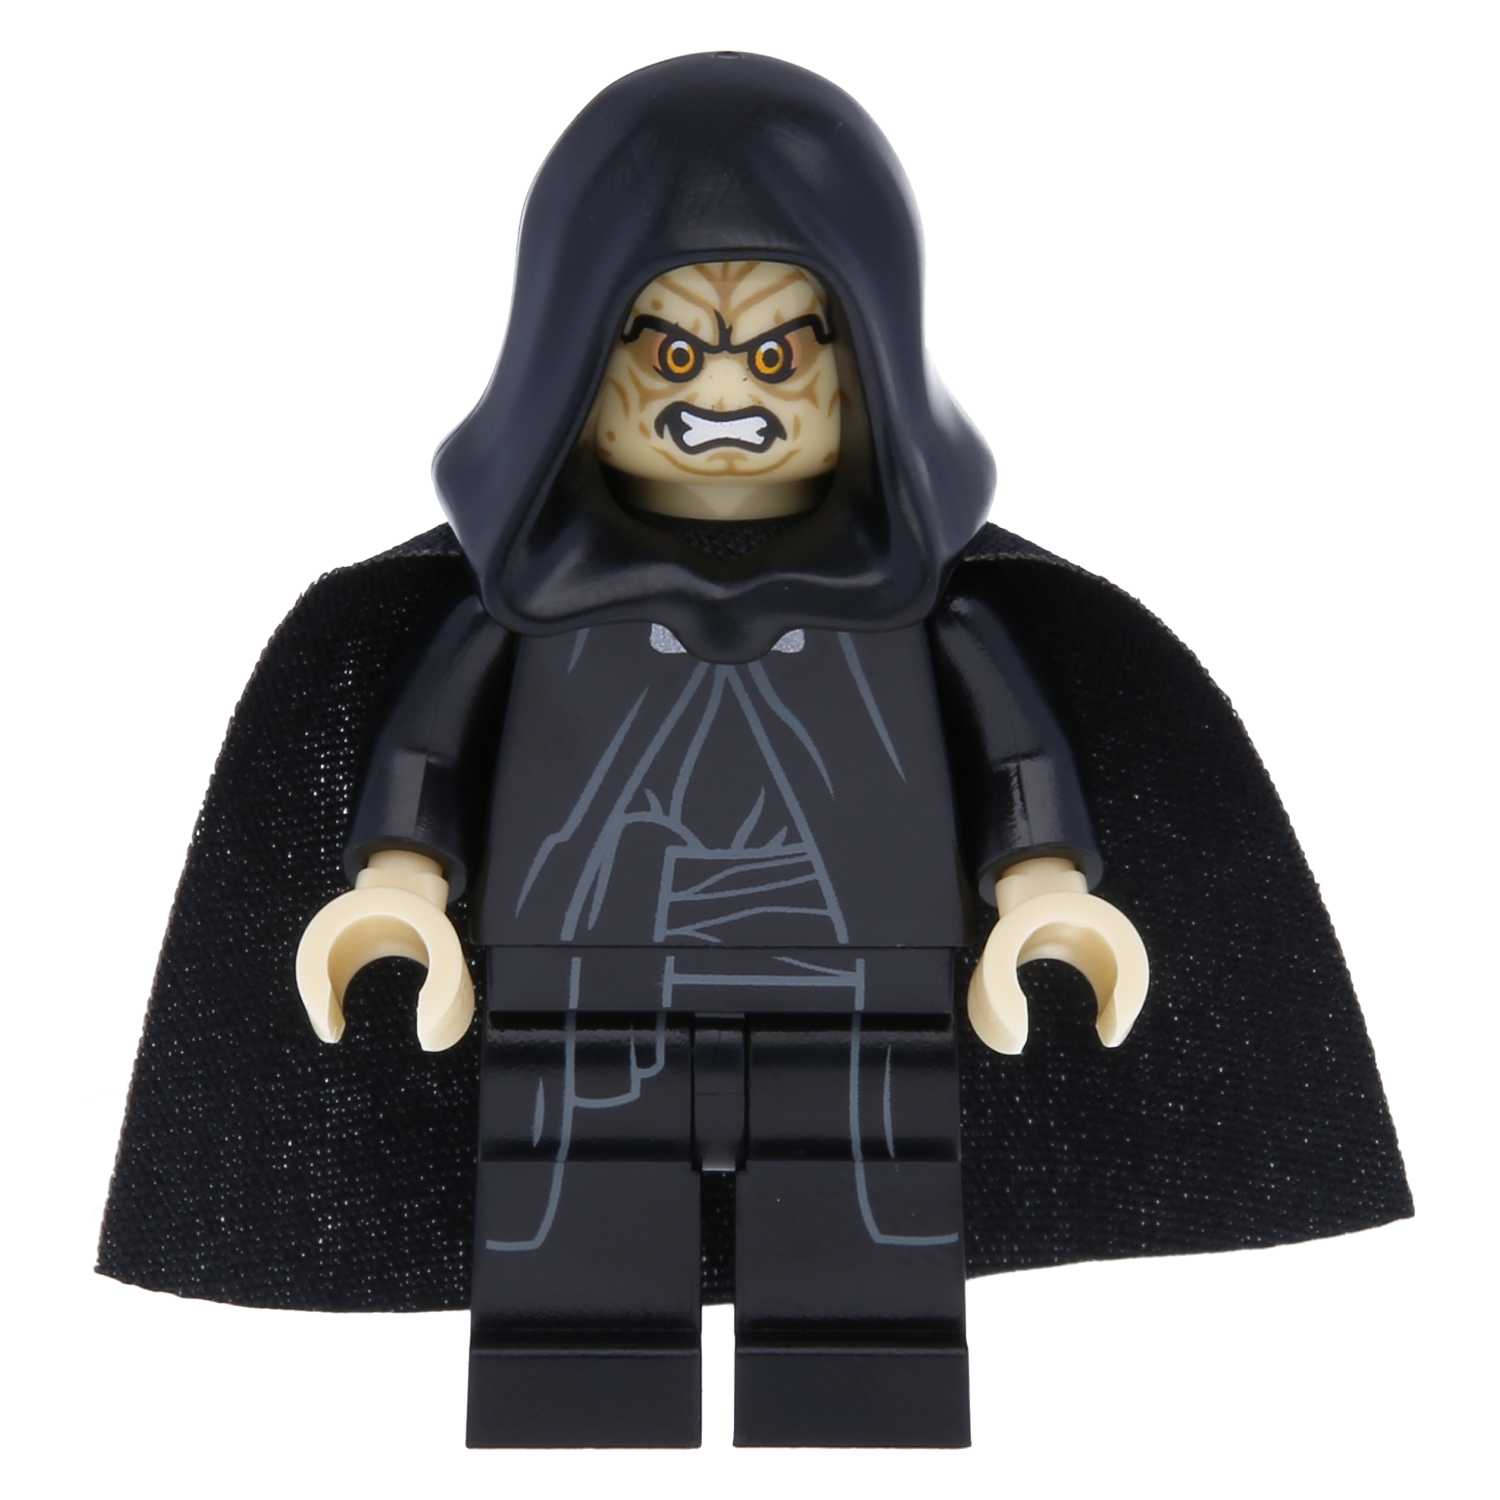 LEGO Star Wars Minifigure - Imperator Palpatine (Beiger Head and Hands)